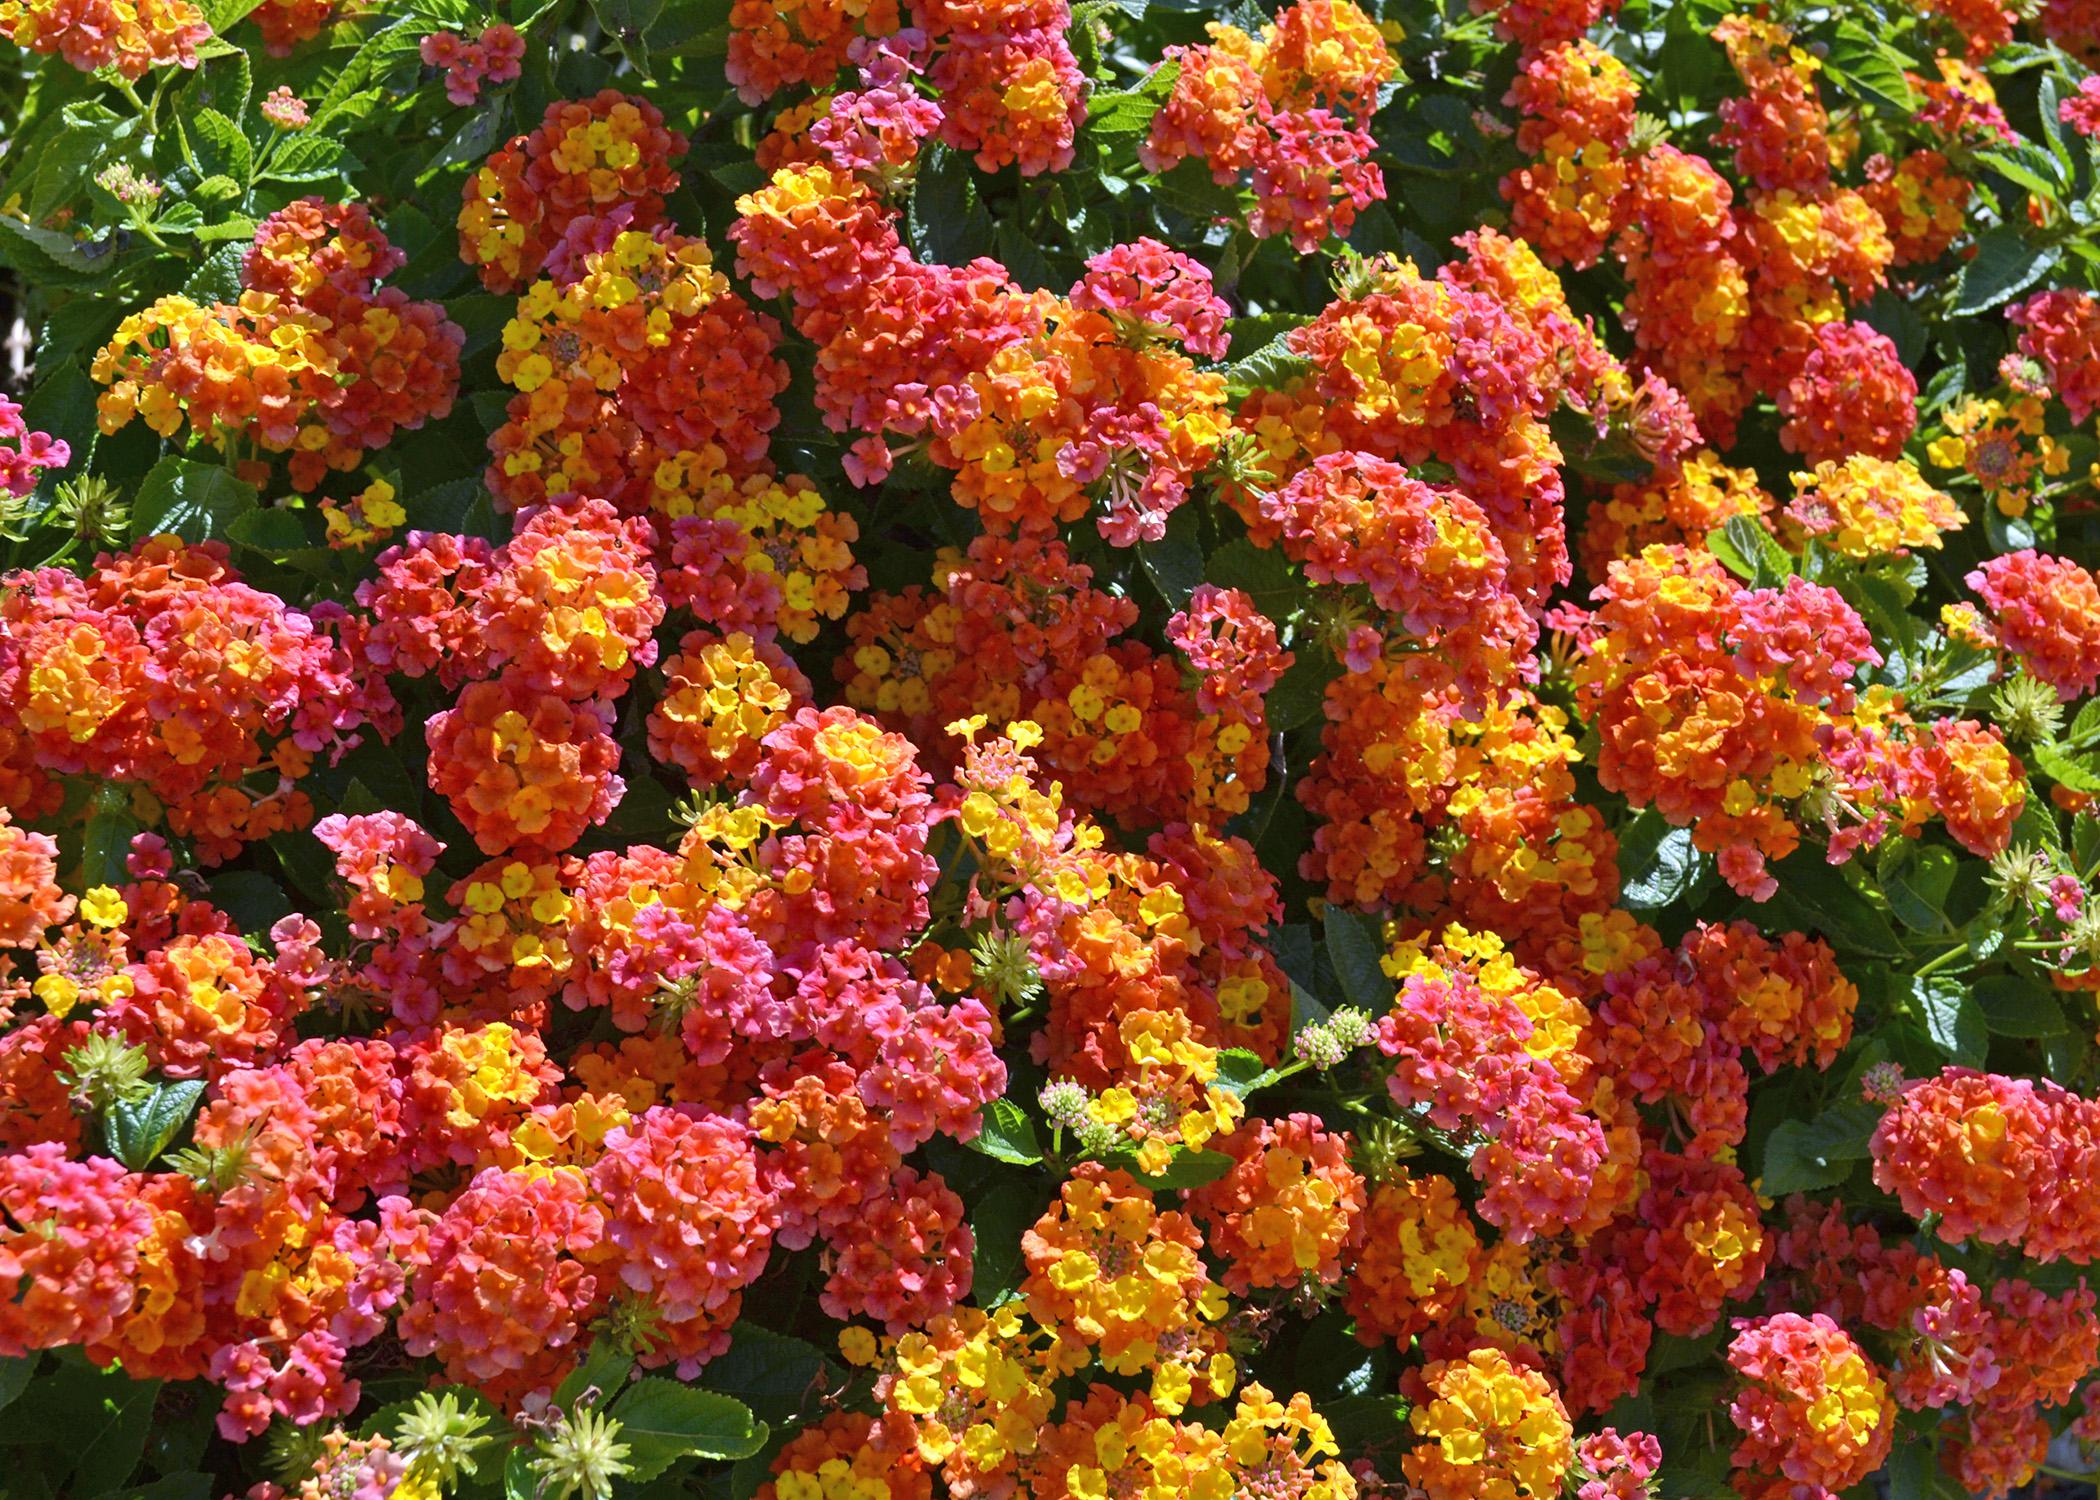 Flowers made up of tiny blooms are red, orange, yellow and pink.